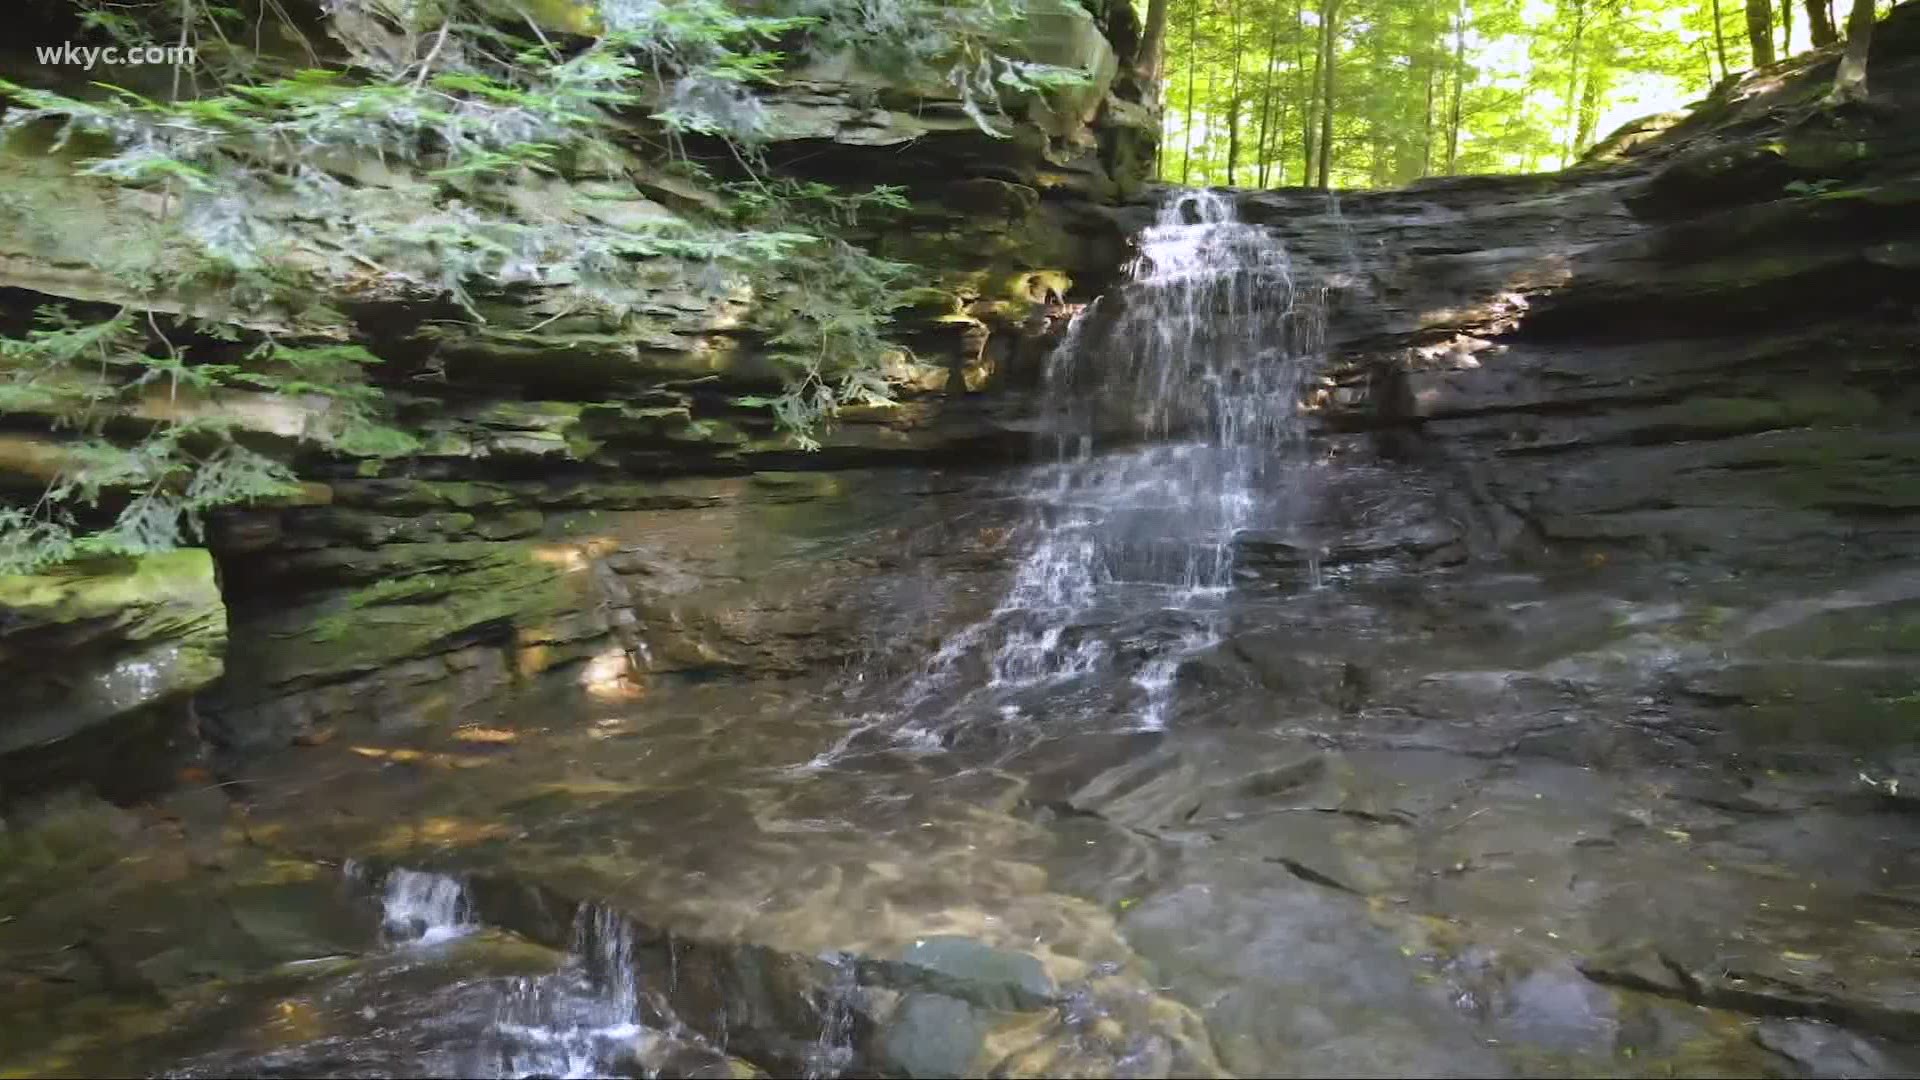 Honey Run Falls is the latest destination in our 'GO-HIO' series with 3News' Matt Standridge. It's the perfect place to take a swim.